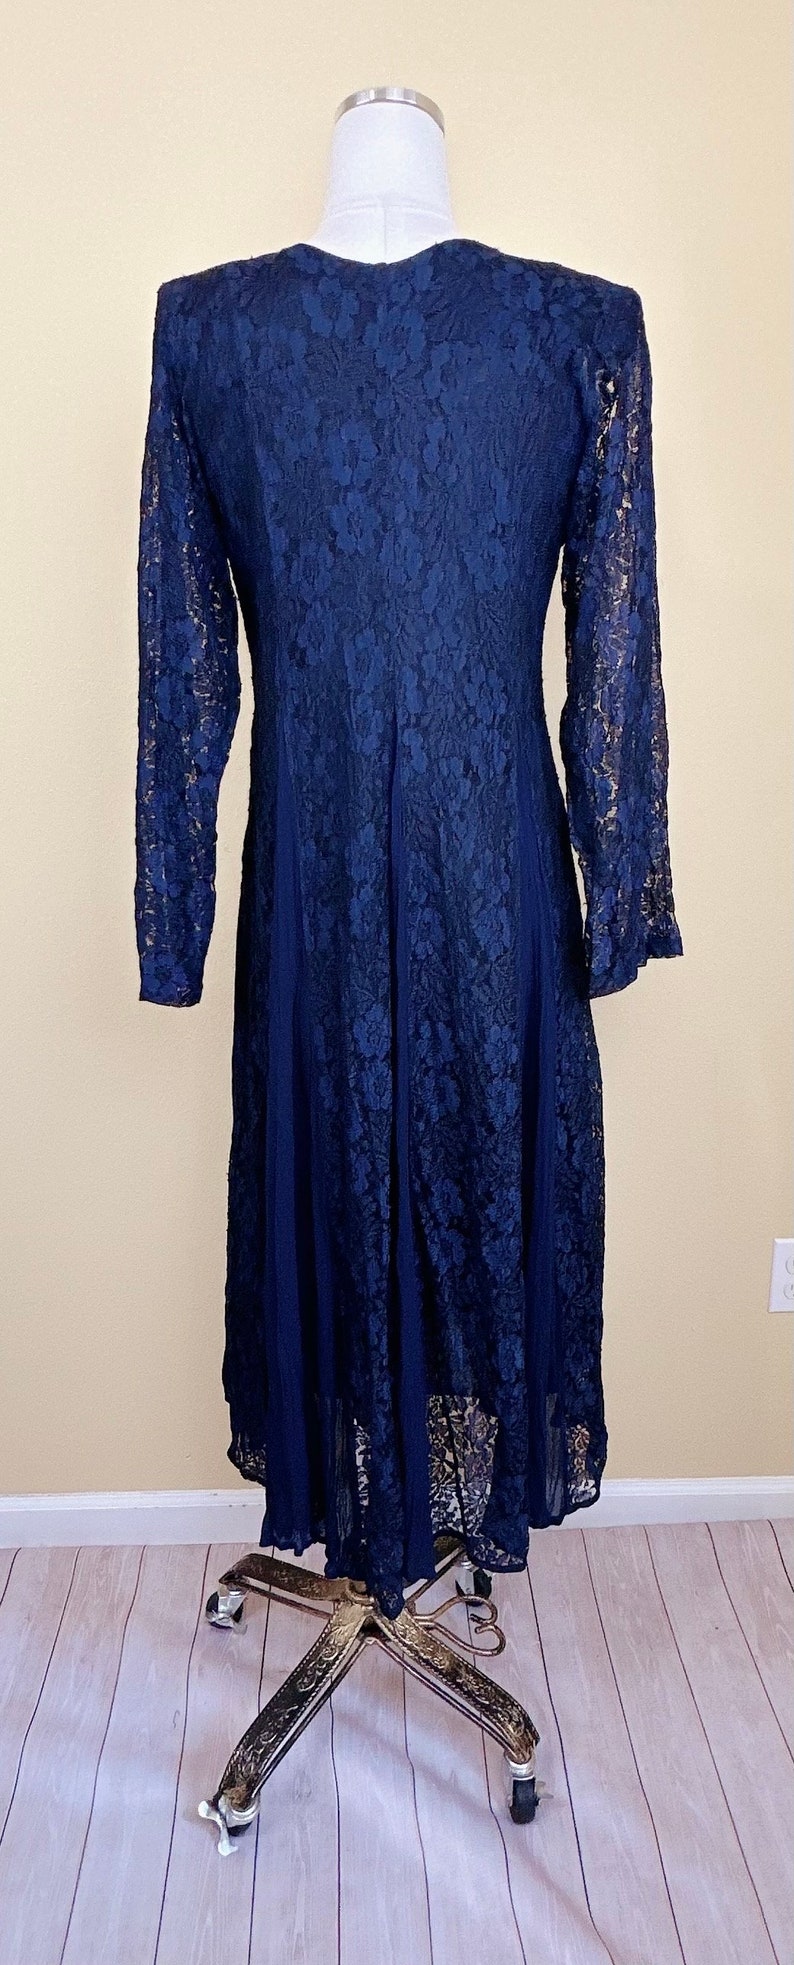 1990s Vintage Nostalgia Rayon Lace Dress / 90s Grunge Sheer Floral Navy Blue and Black Midi Dress / Size Small Medium image 4